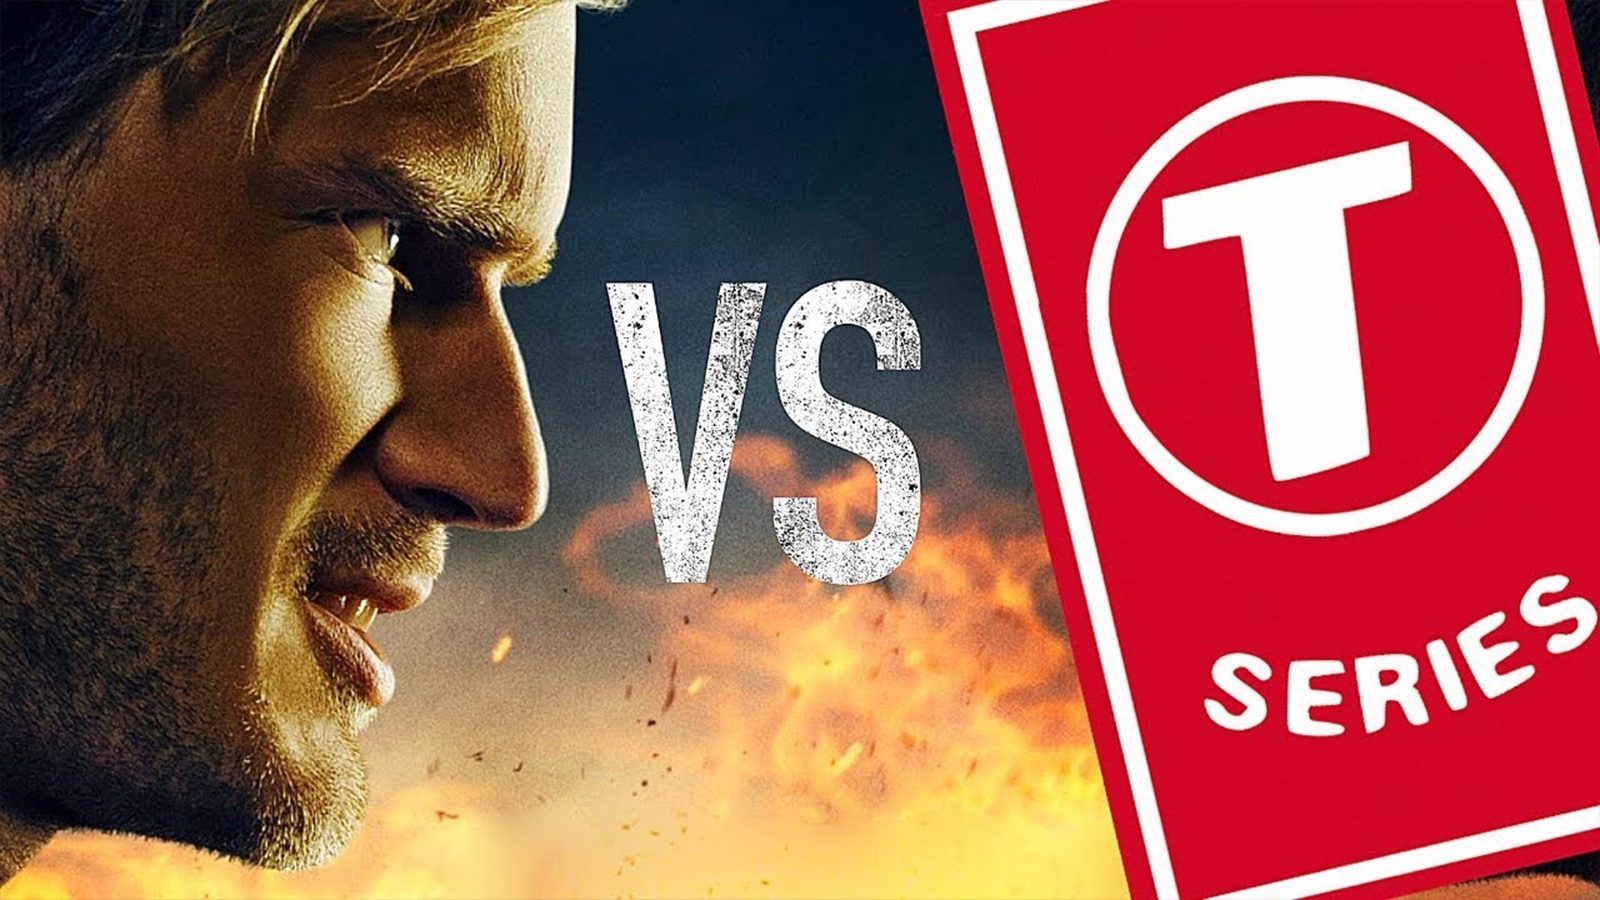 This Amazing Fan Made Pewdiepie Vs T Series Movie Trailer - Pewdiepie Vs T Series , HD Wallpaper & Backgrounds